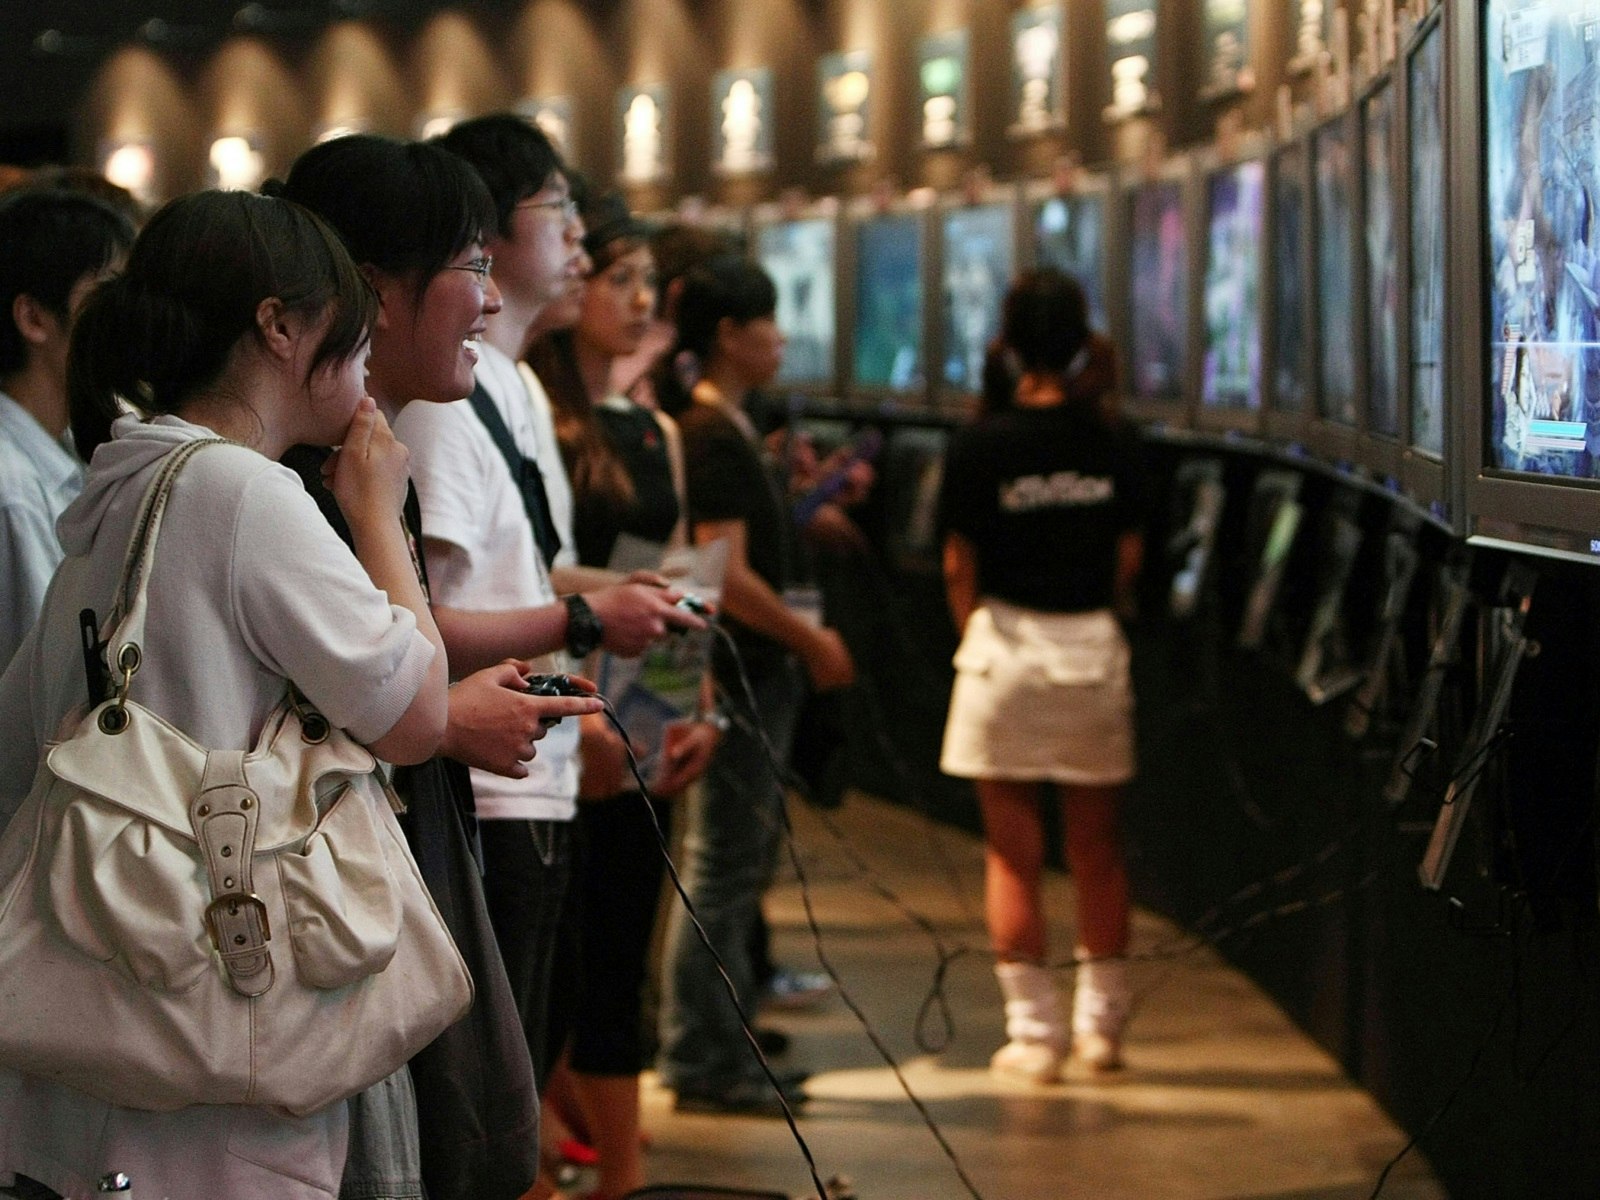 A group of people hold game controllers while standing in front large screens; Tokyo